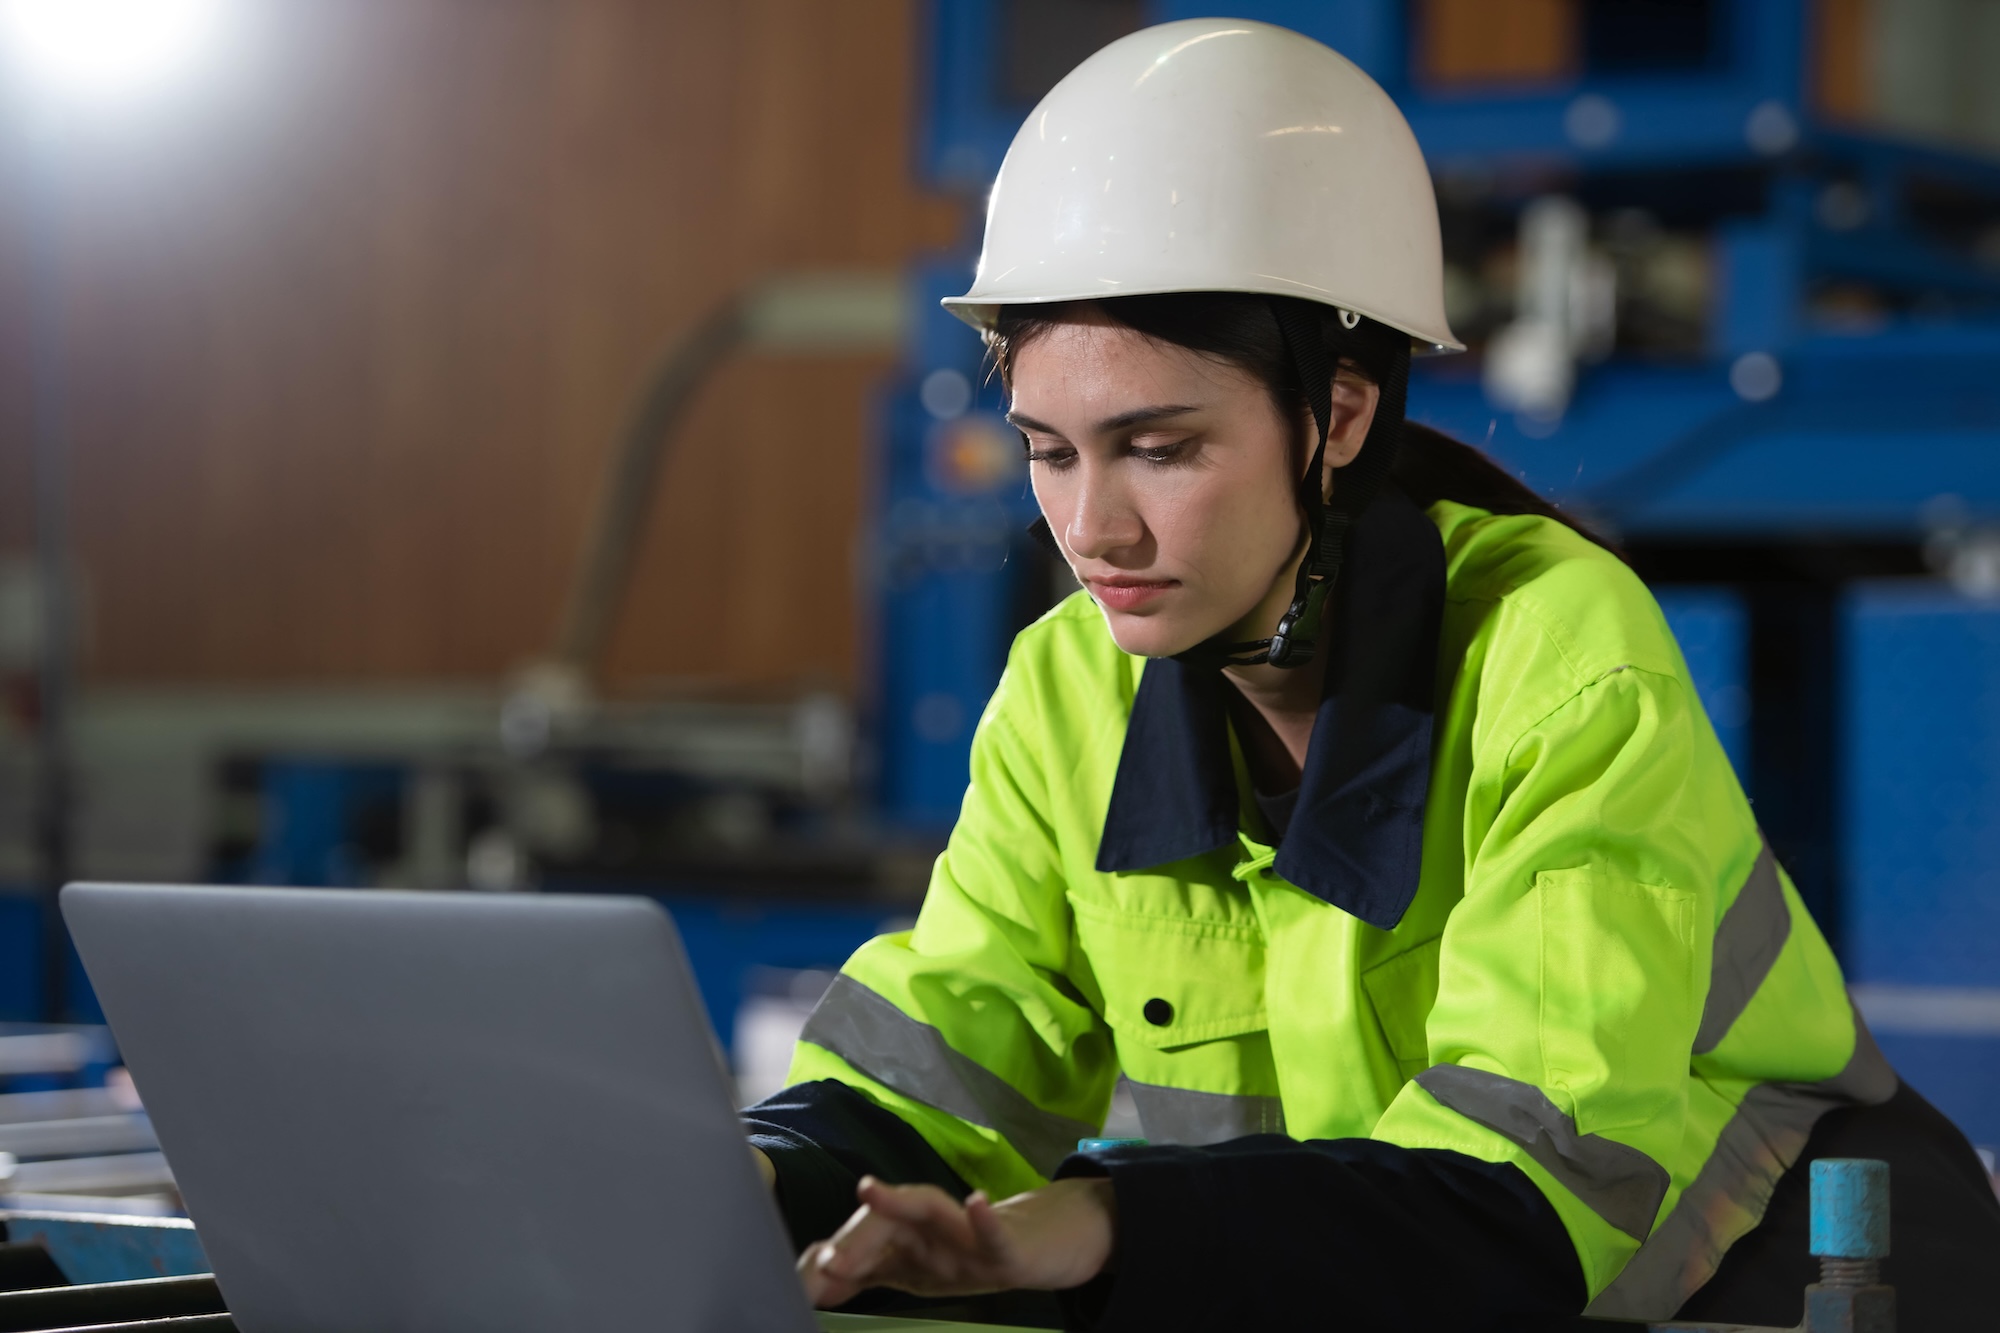 woman-wearing-hard-hat-and-hi-vis-jacket-taking-smsts-course-on-laptop